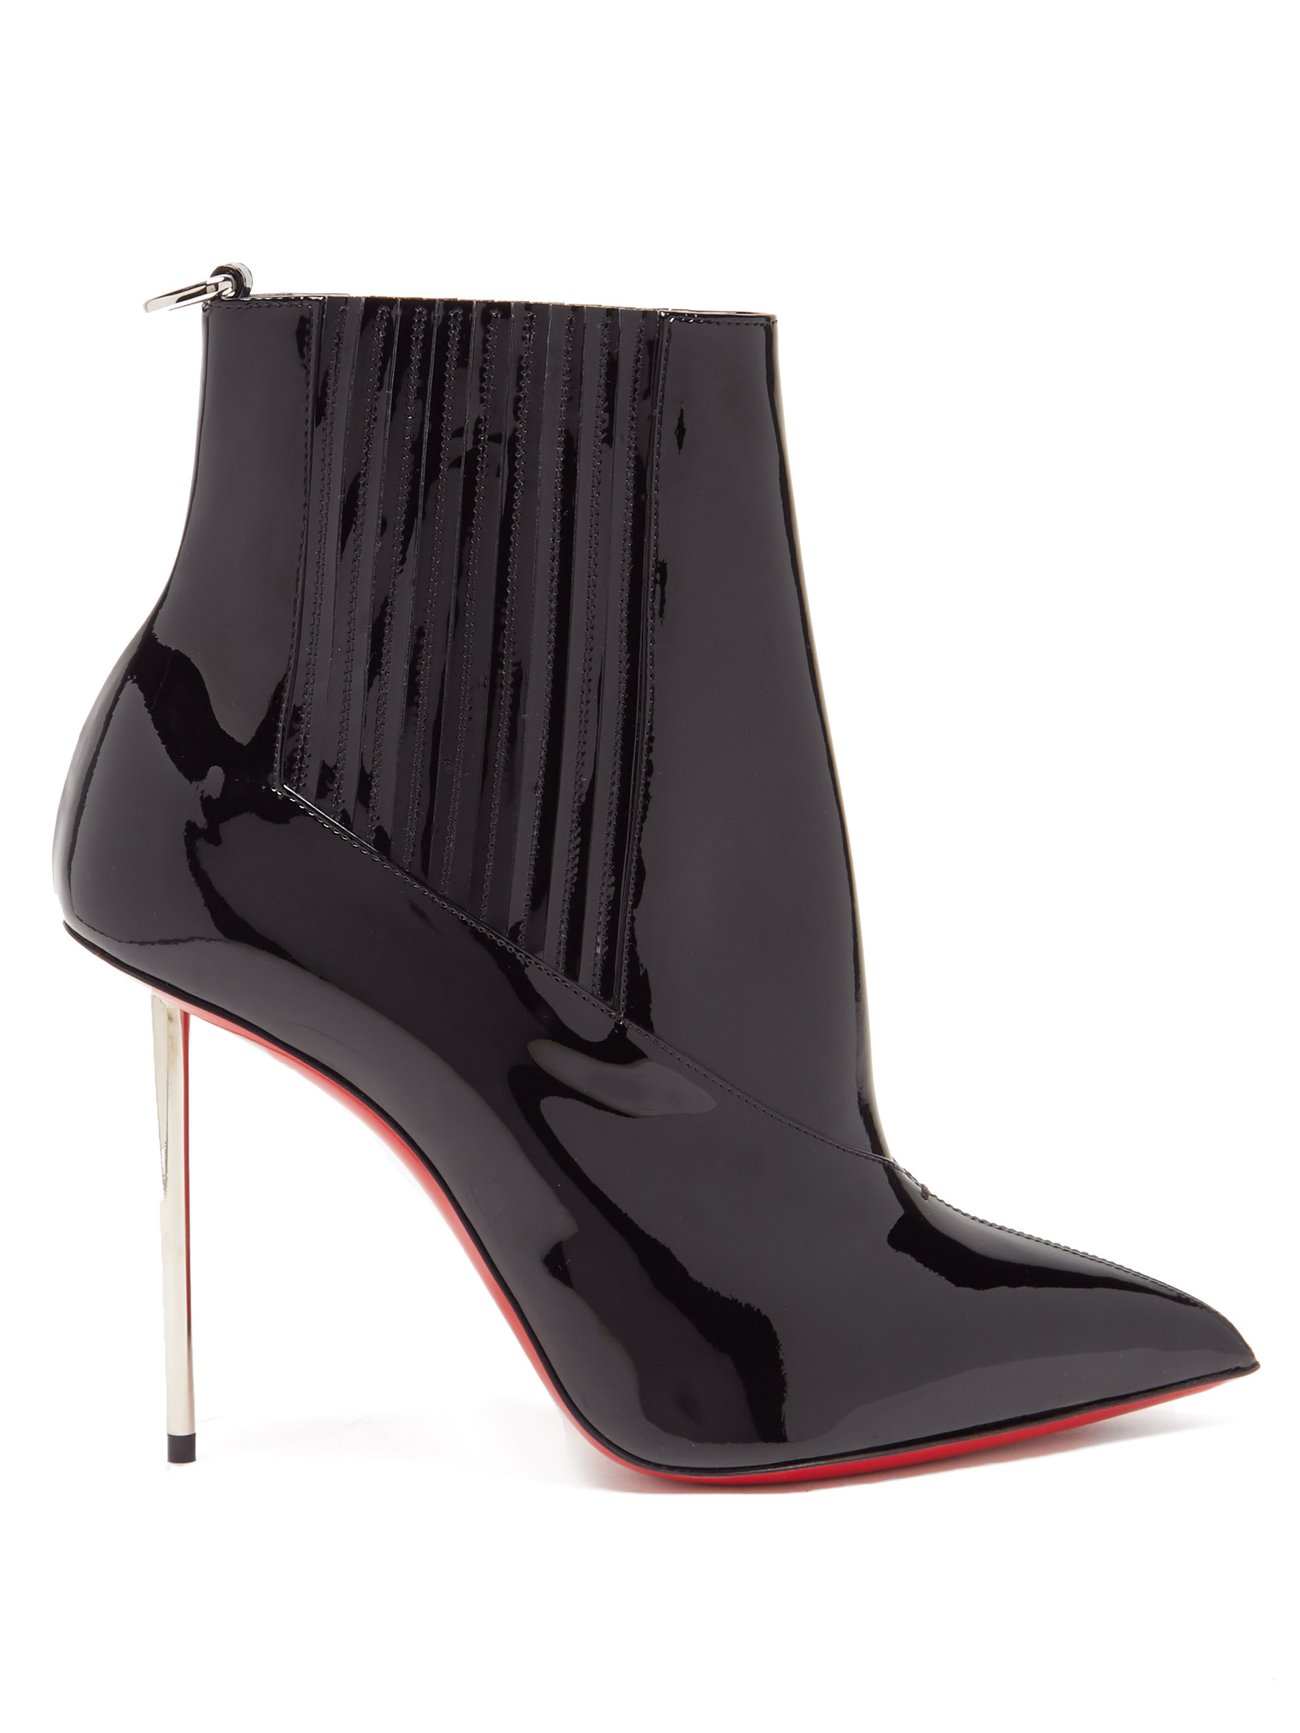 Leather boots Christian Louboutin Black size 39 EU in Leather